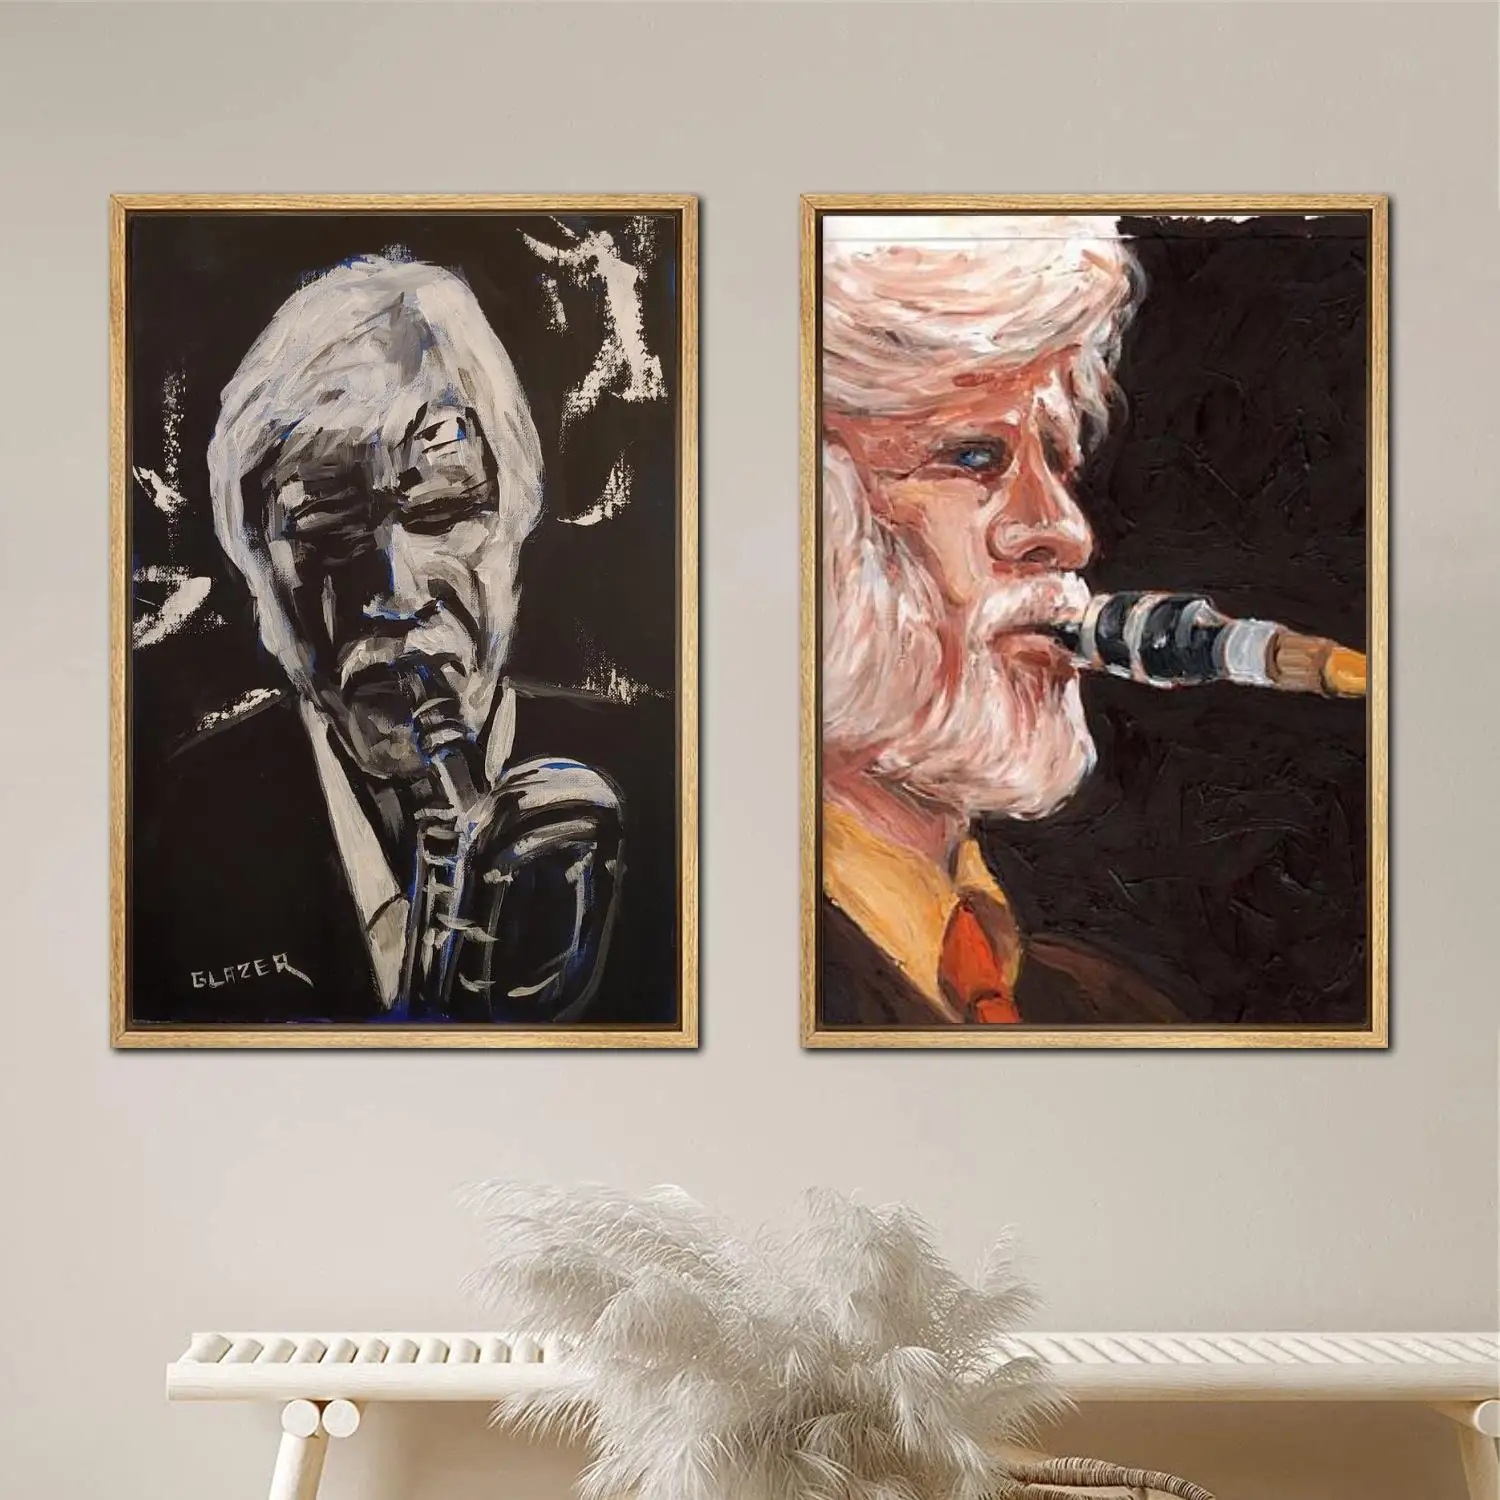 Gerry Mulligan Poster Painting 24x36 Wall Art Canvas Posters room decor Modern Family bedroom Decoration Art wall decor